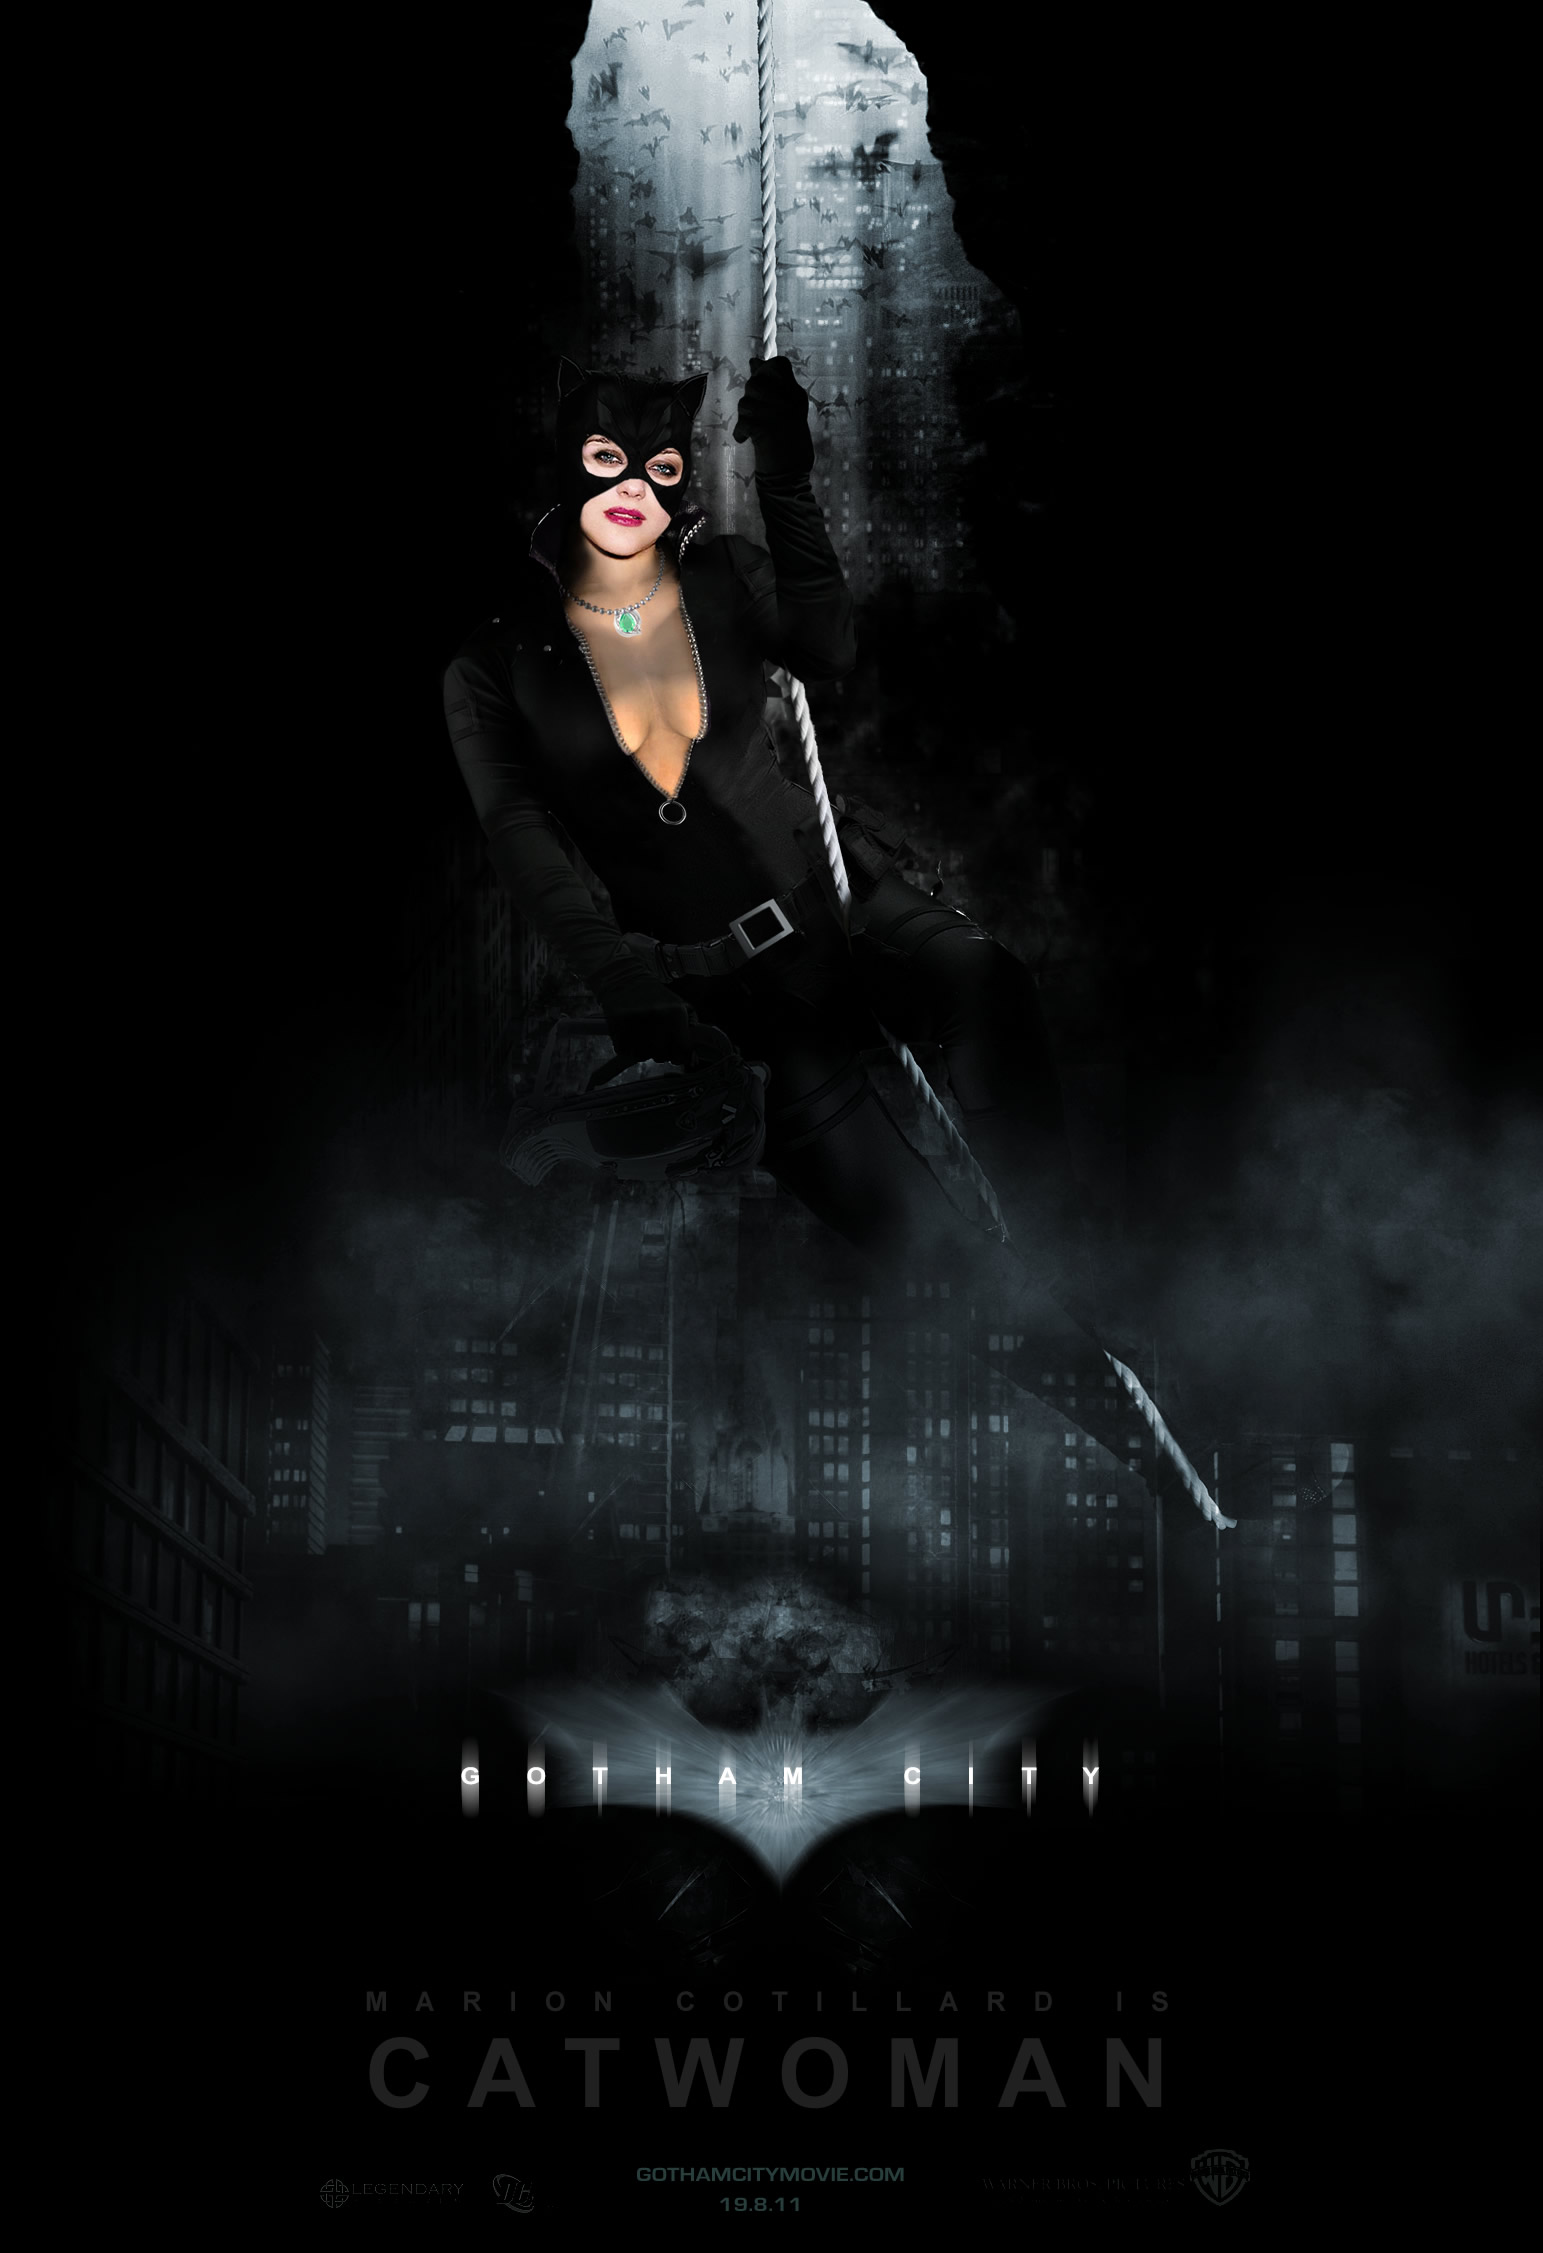 The+dark+knight+rises+catwoman+poster